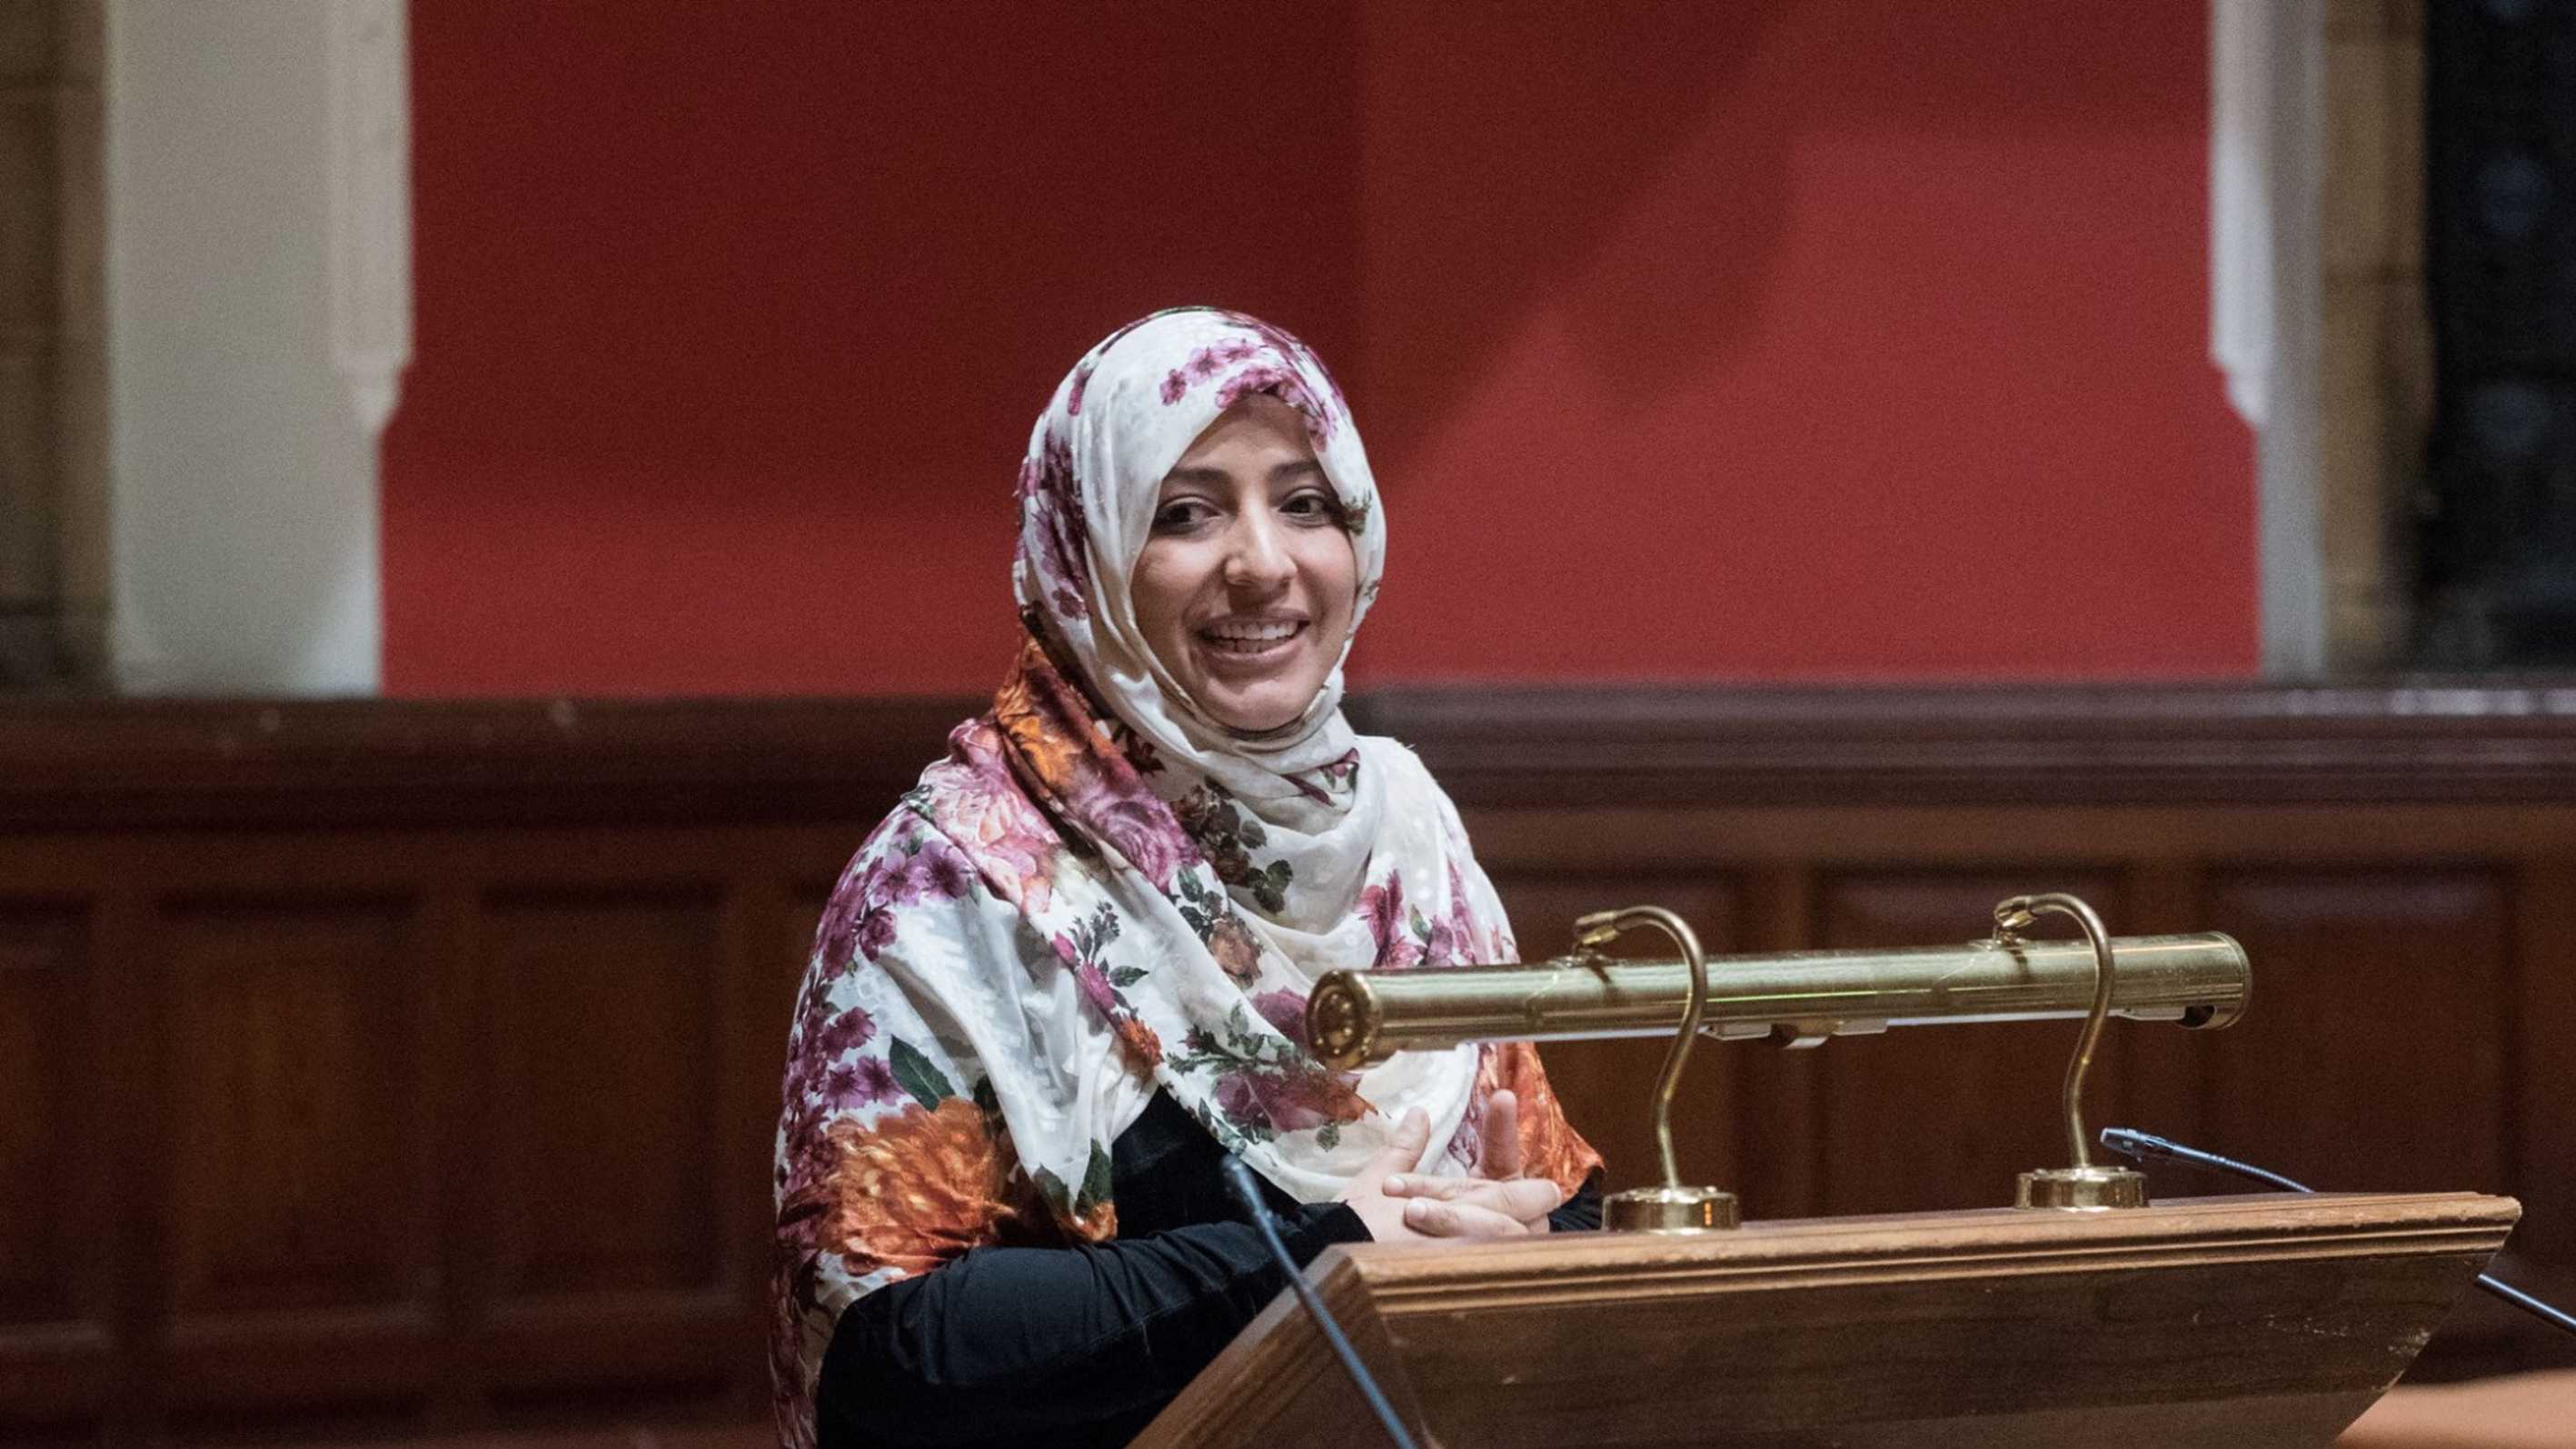 Speech by Nobel Peace Prize laureate Tawakkol Karman at the closing session of the Nobel Laureates of Physics Summit - Germany